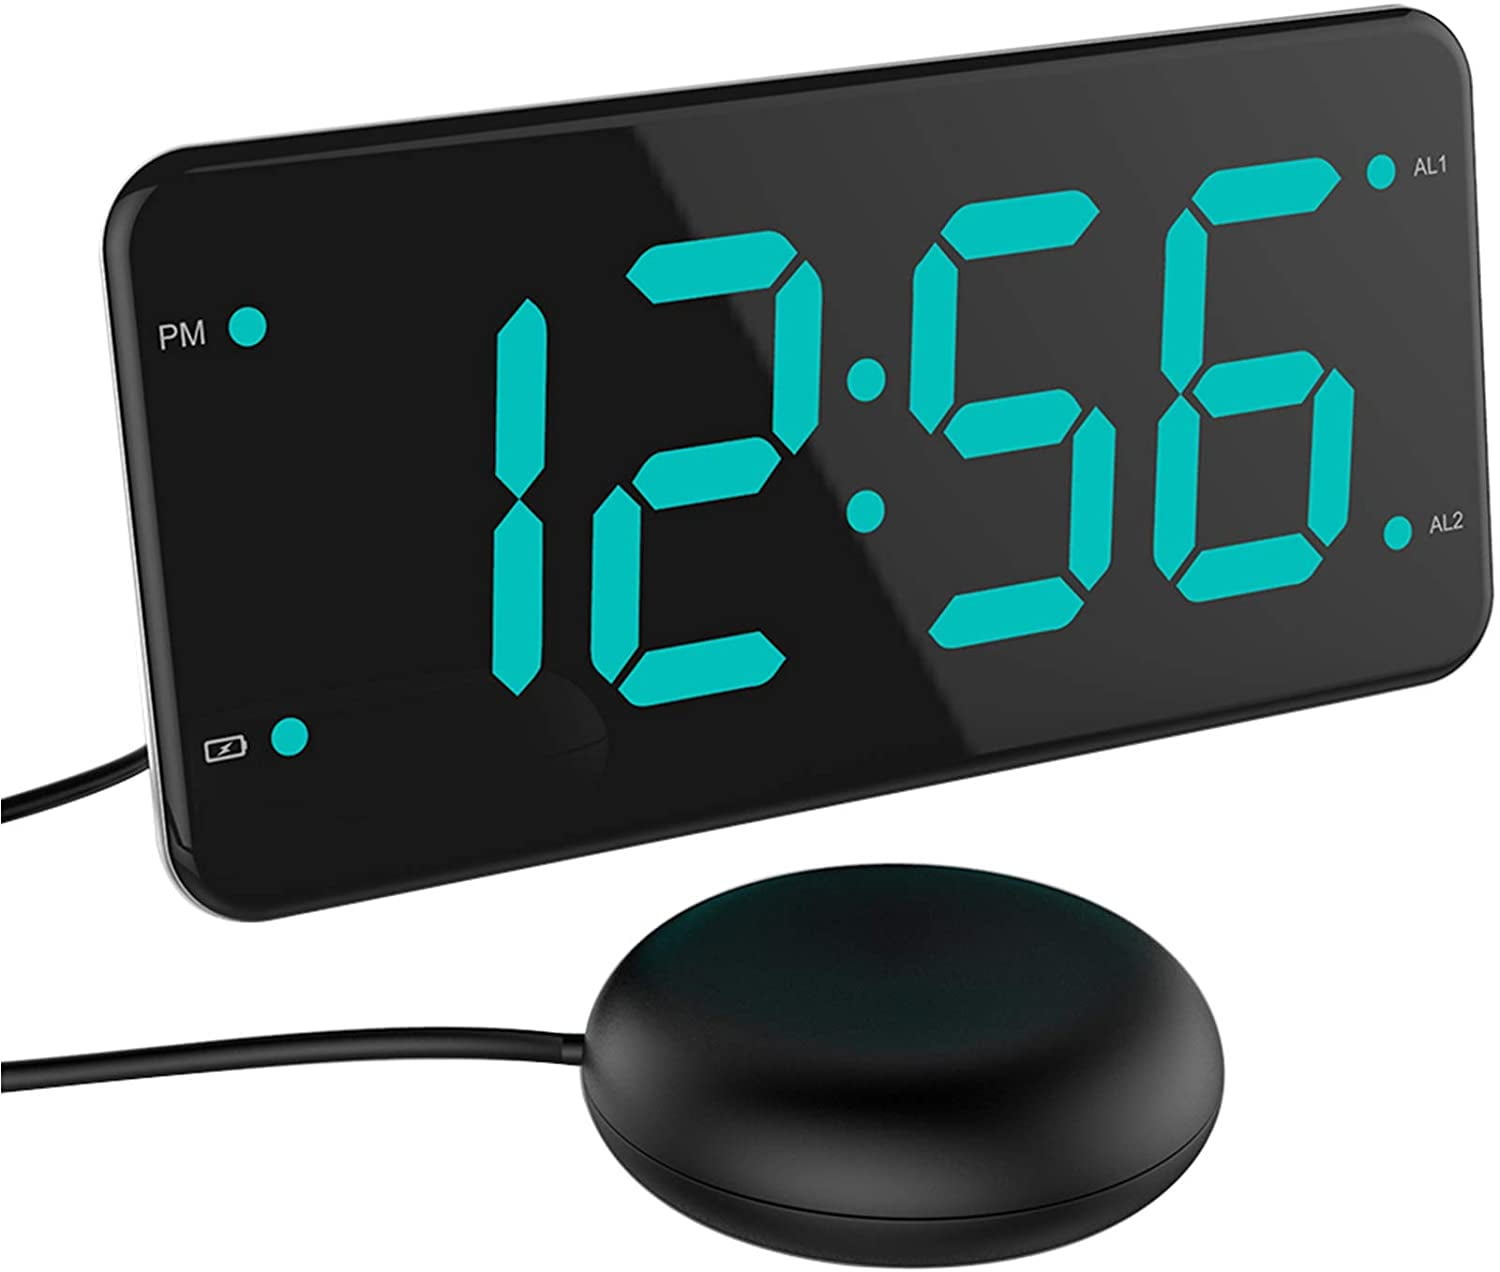 Details about   Extra Loud Vibrating Dual Alarm Clock Heavy Sleeper Bed Shaker Large Display 